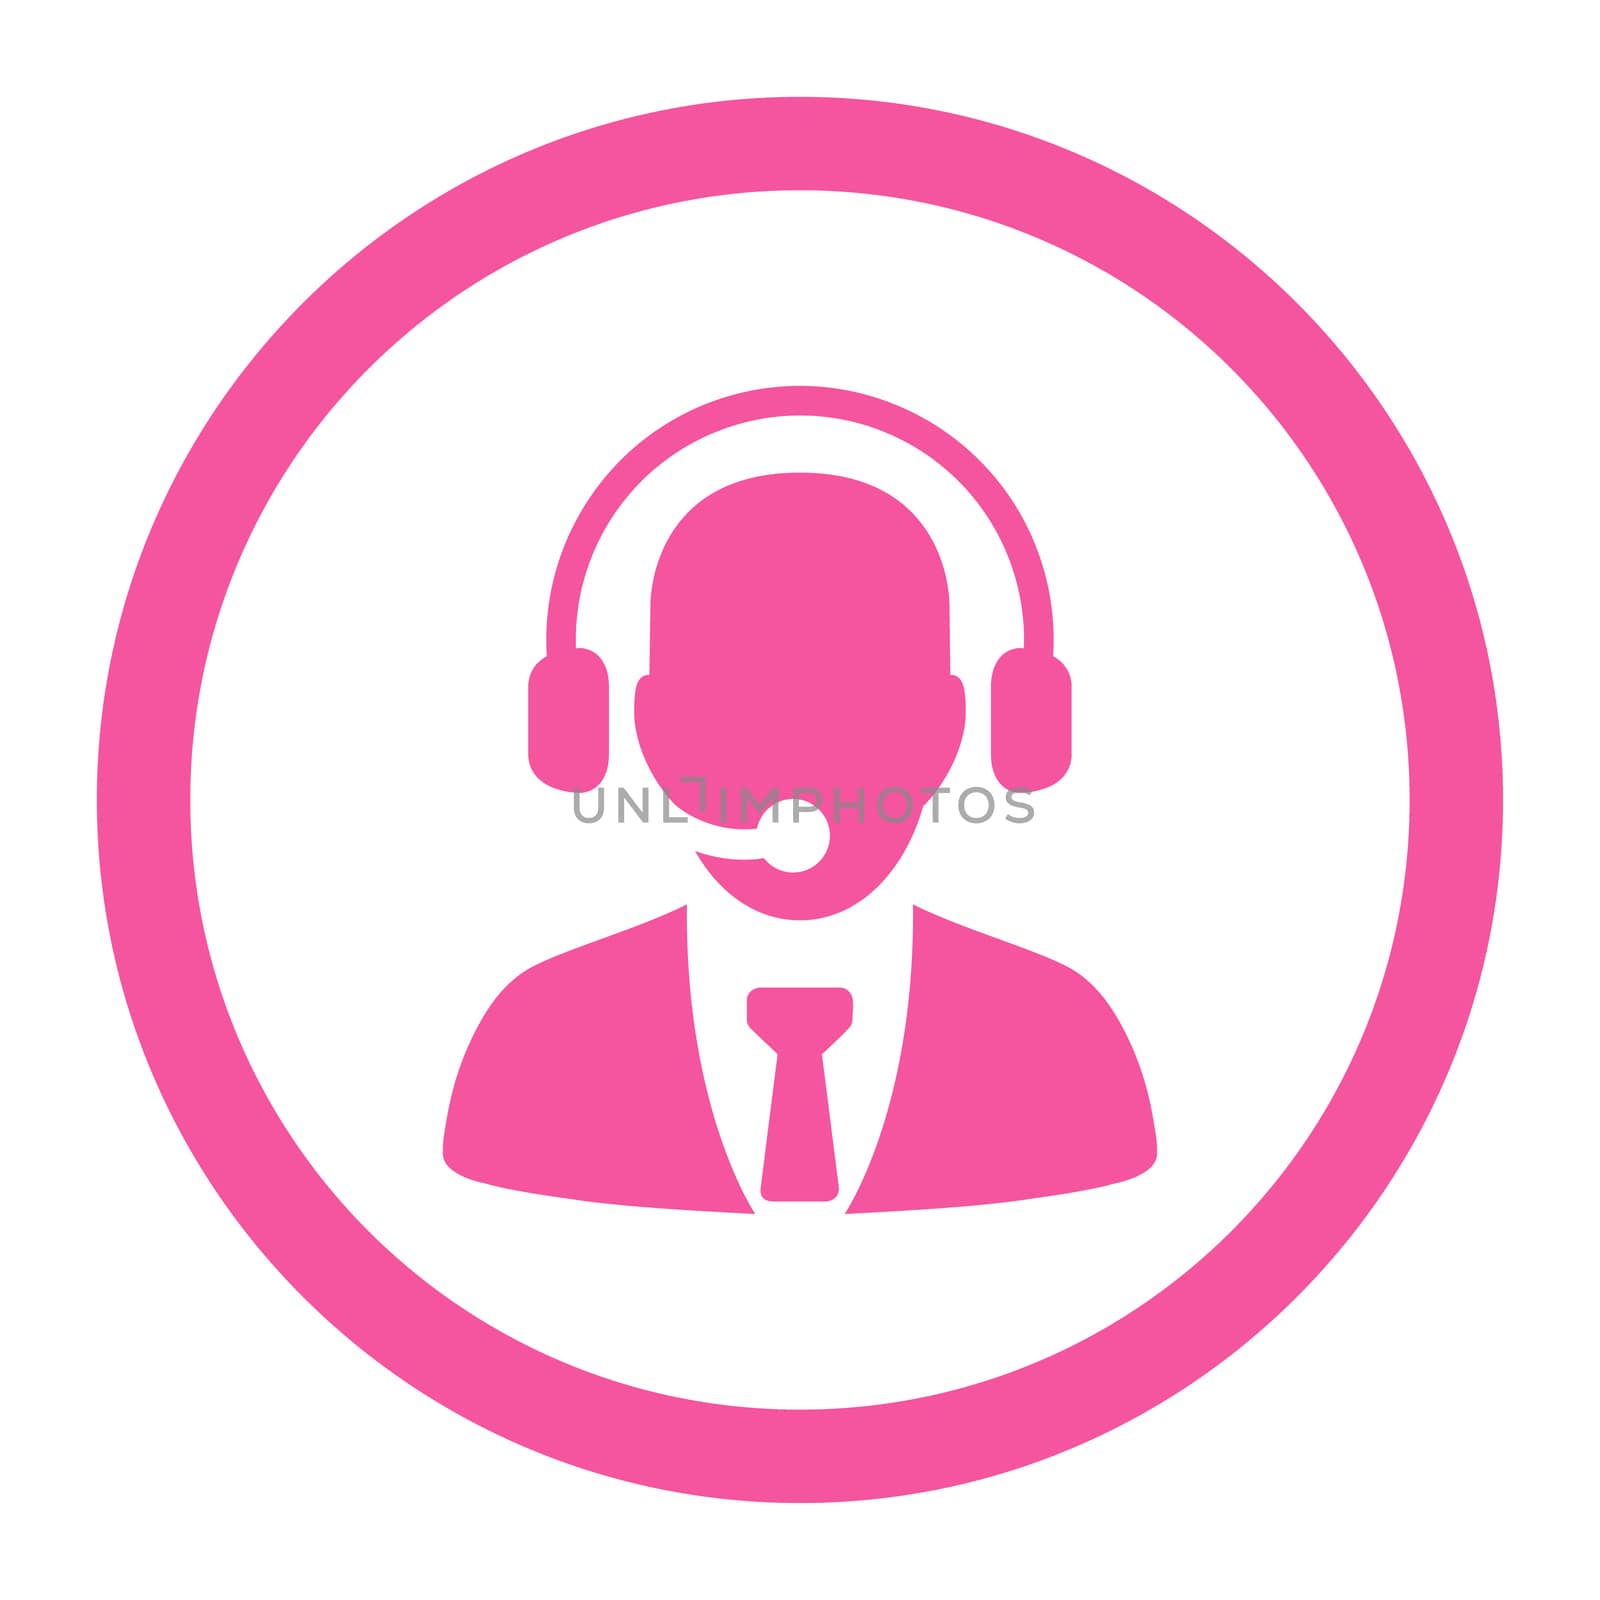 Call center glyph icon. This rounded flat symbol is drawn with pink color on a white background.